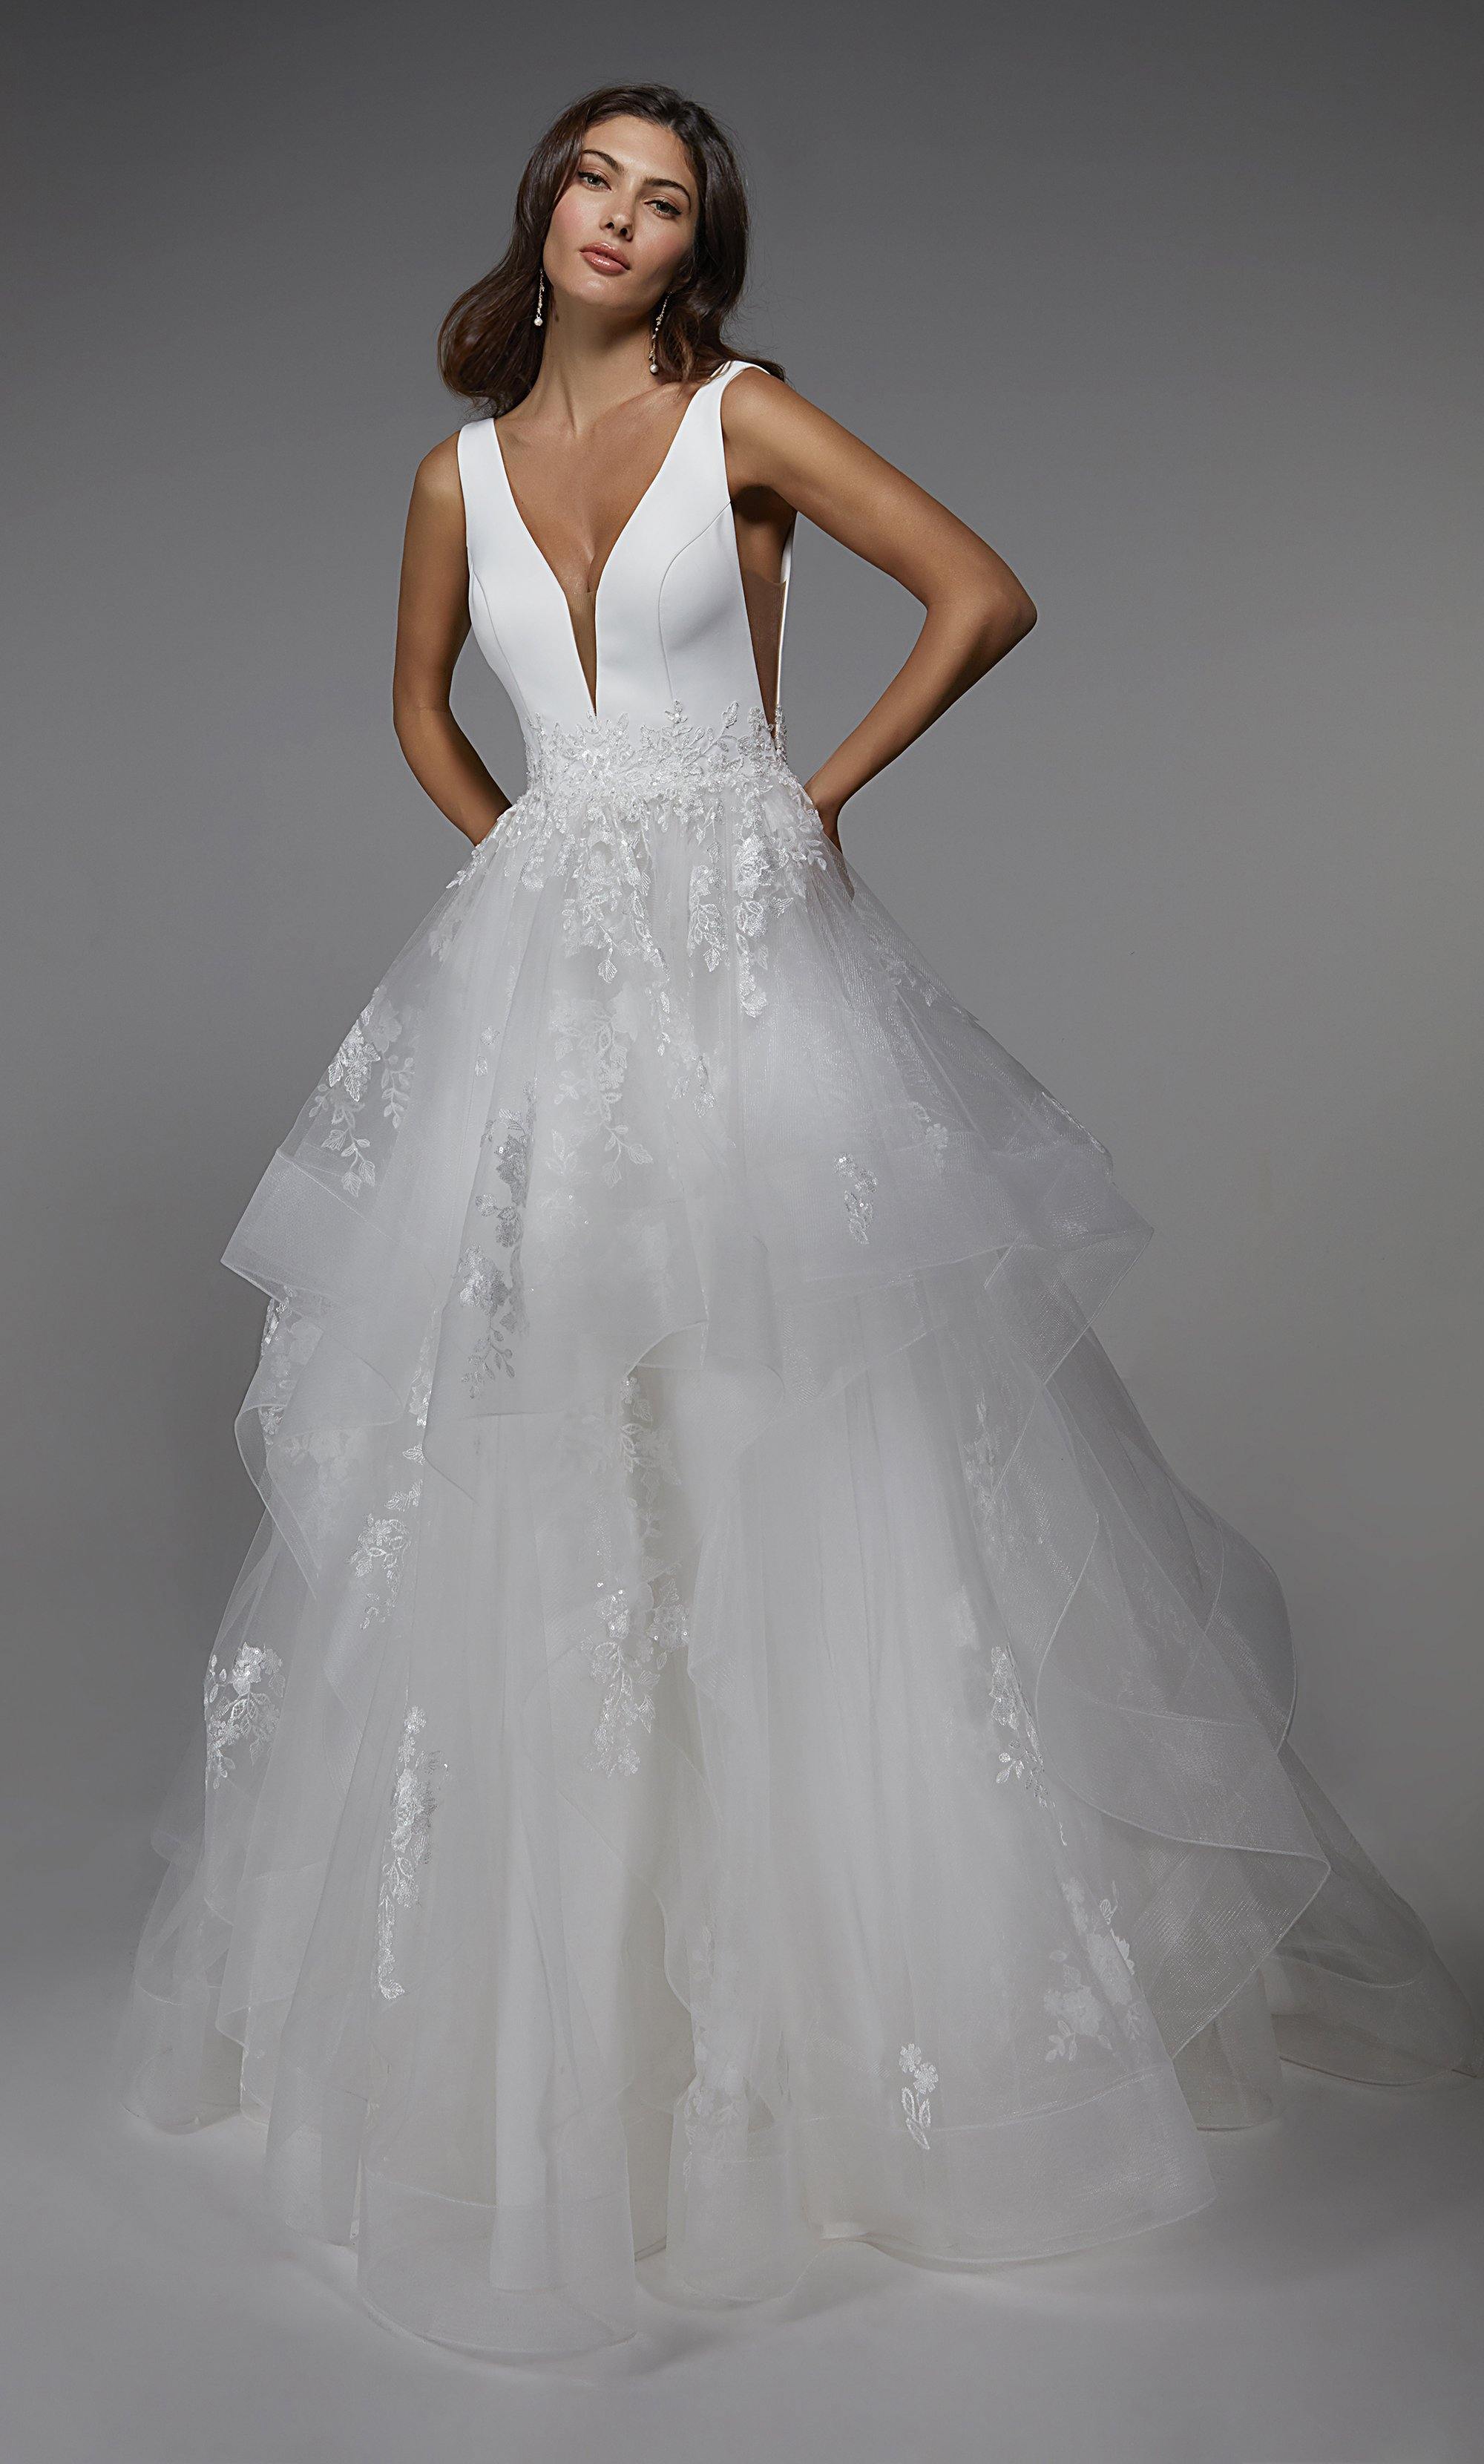 Formal Dress: 7040. Long Bridal Gown, Plunging Neckline, Ball Gown